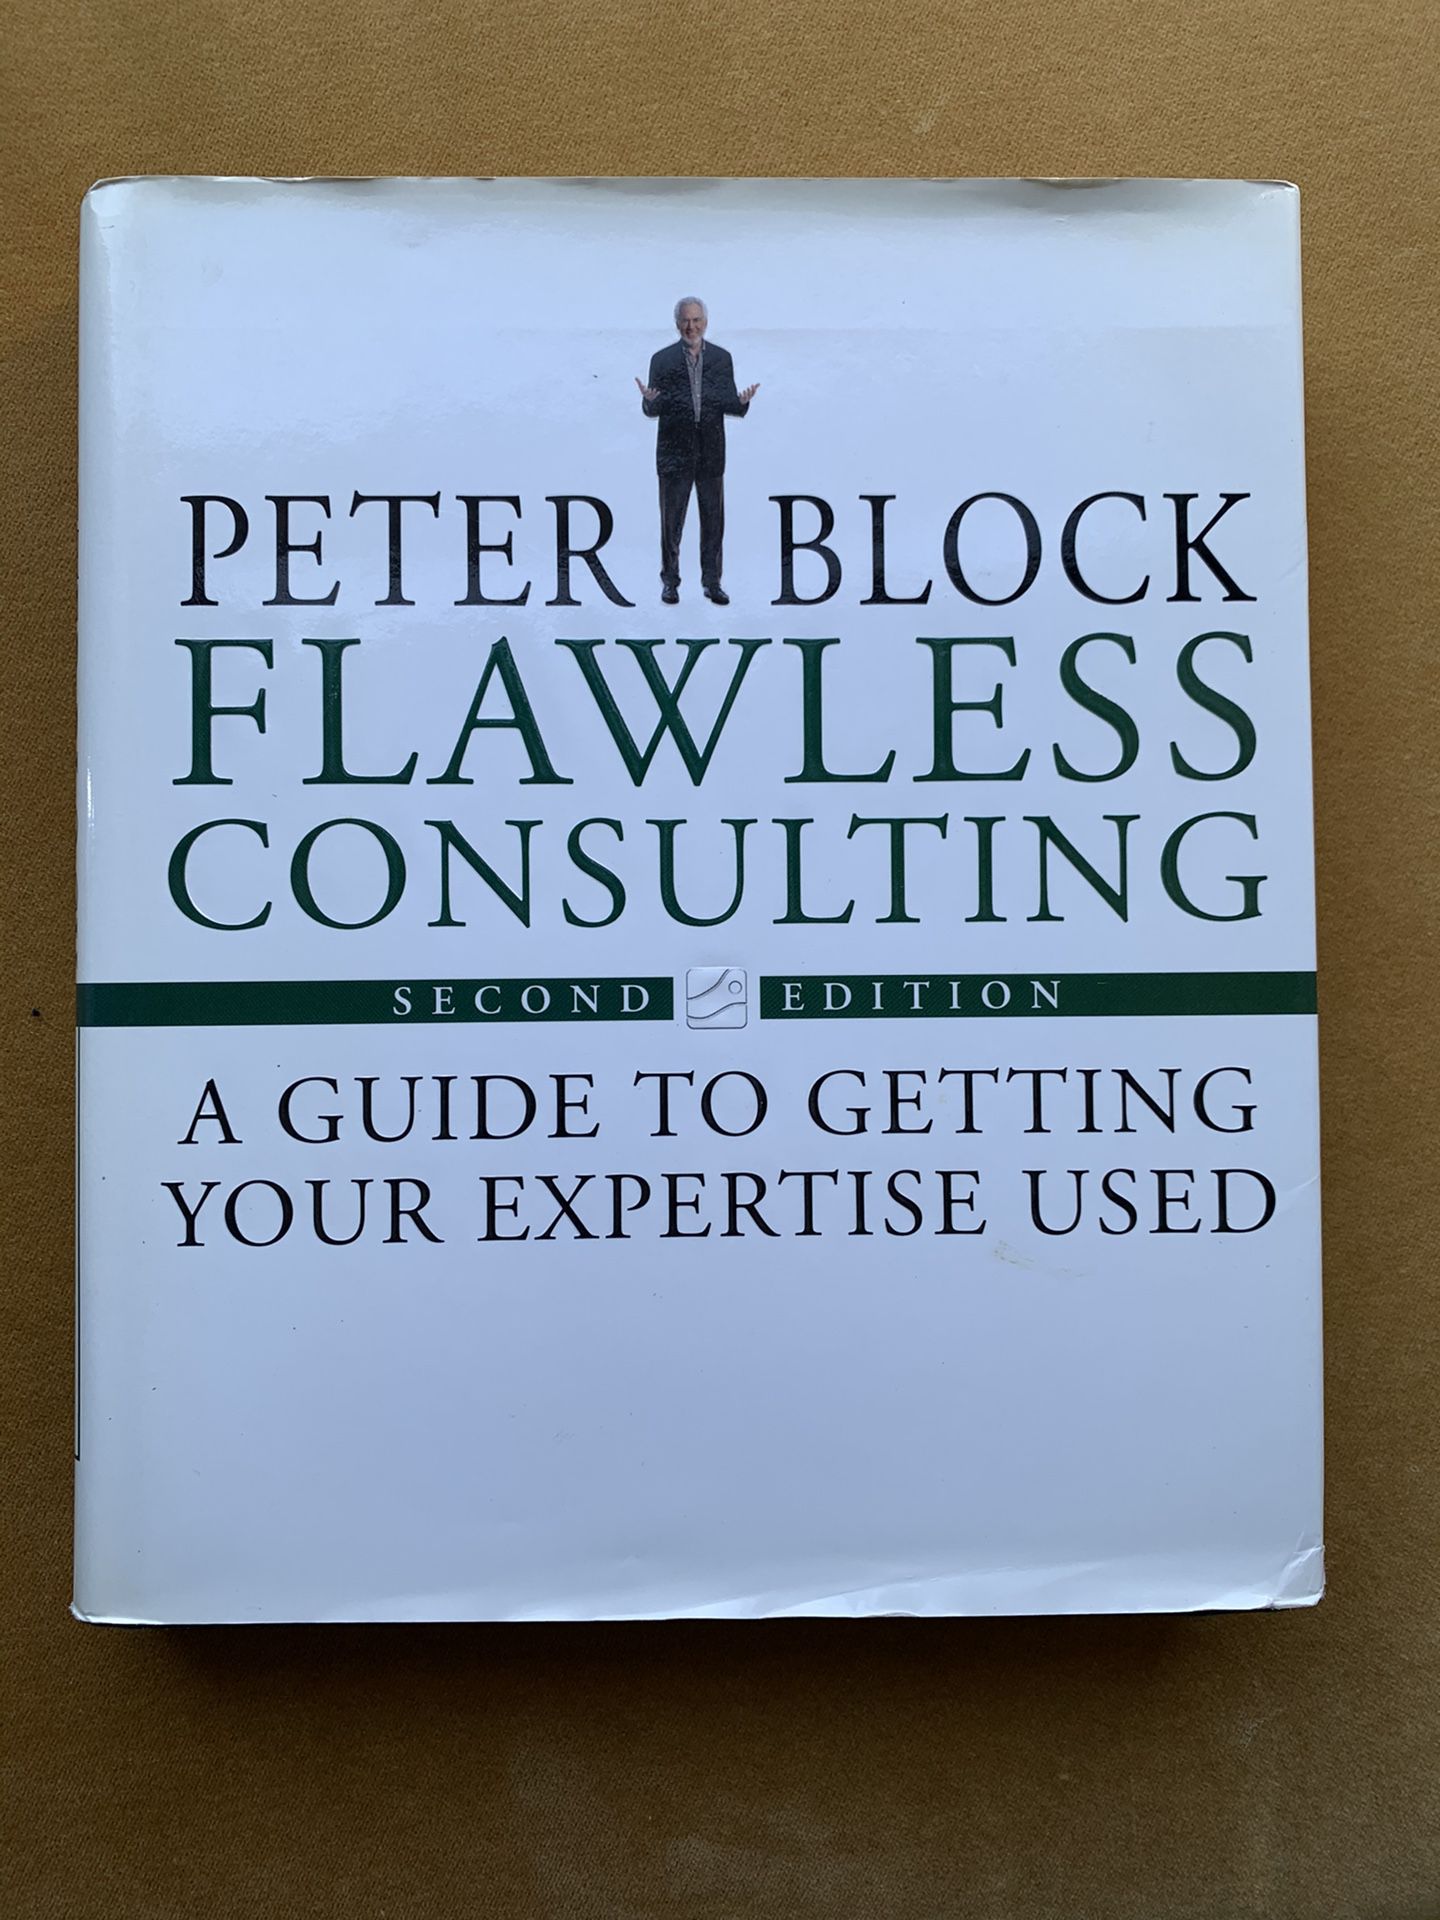 Flawless Consulting 2nd edition by Peter Block - hardcover